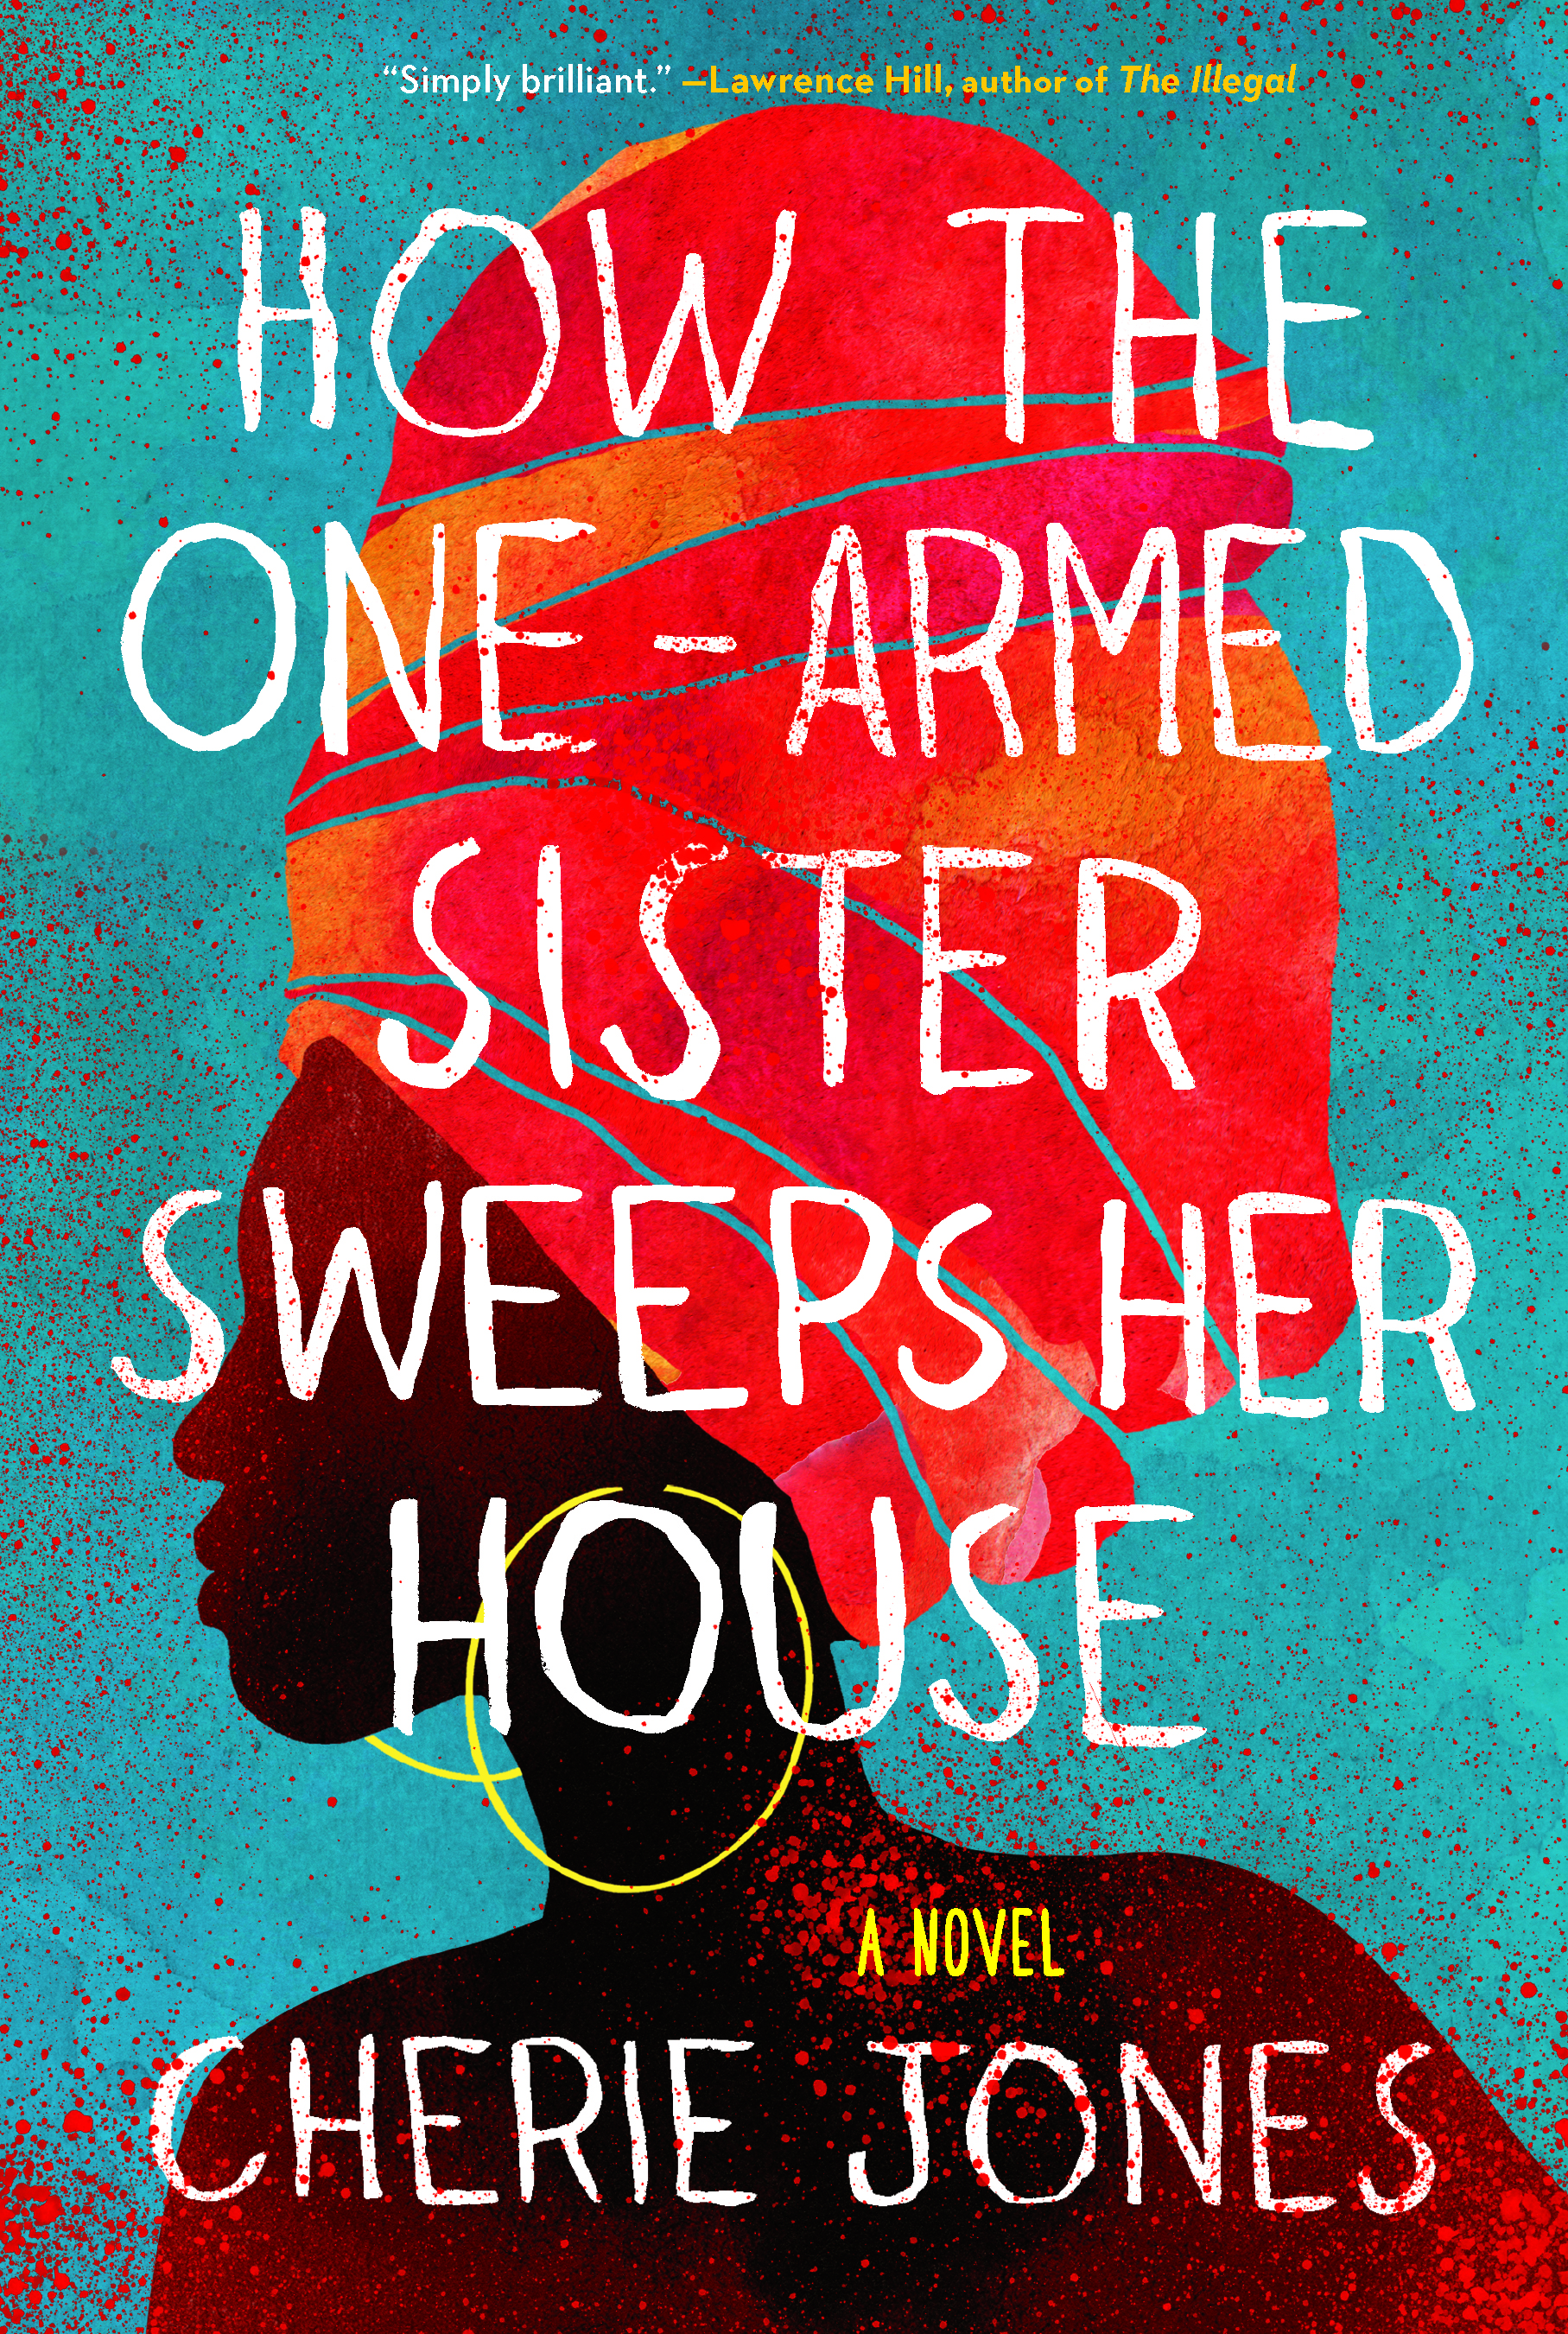 How the One-armed Sister Sweeps her House